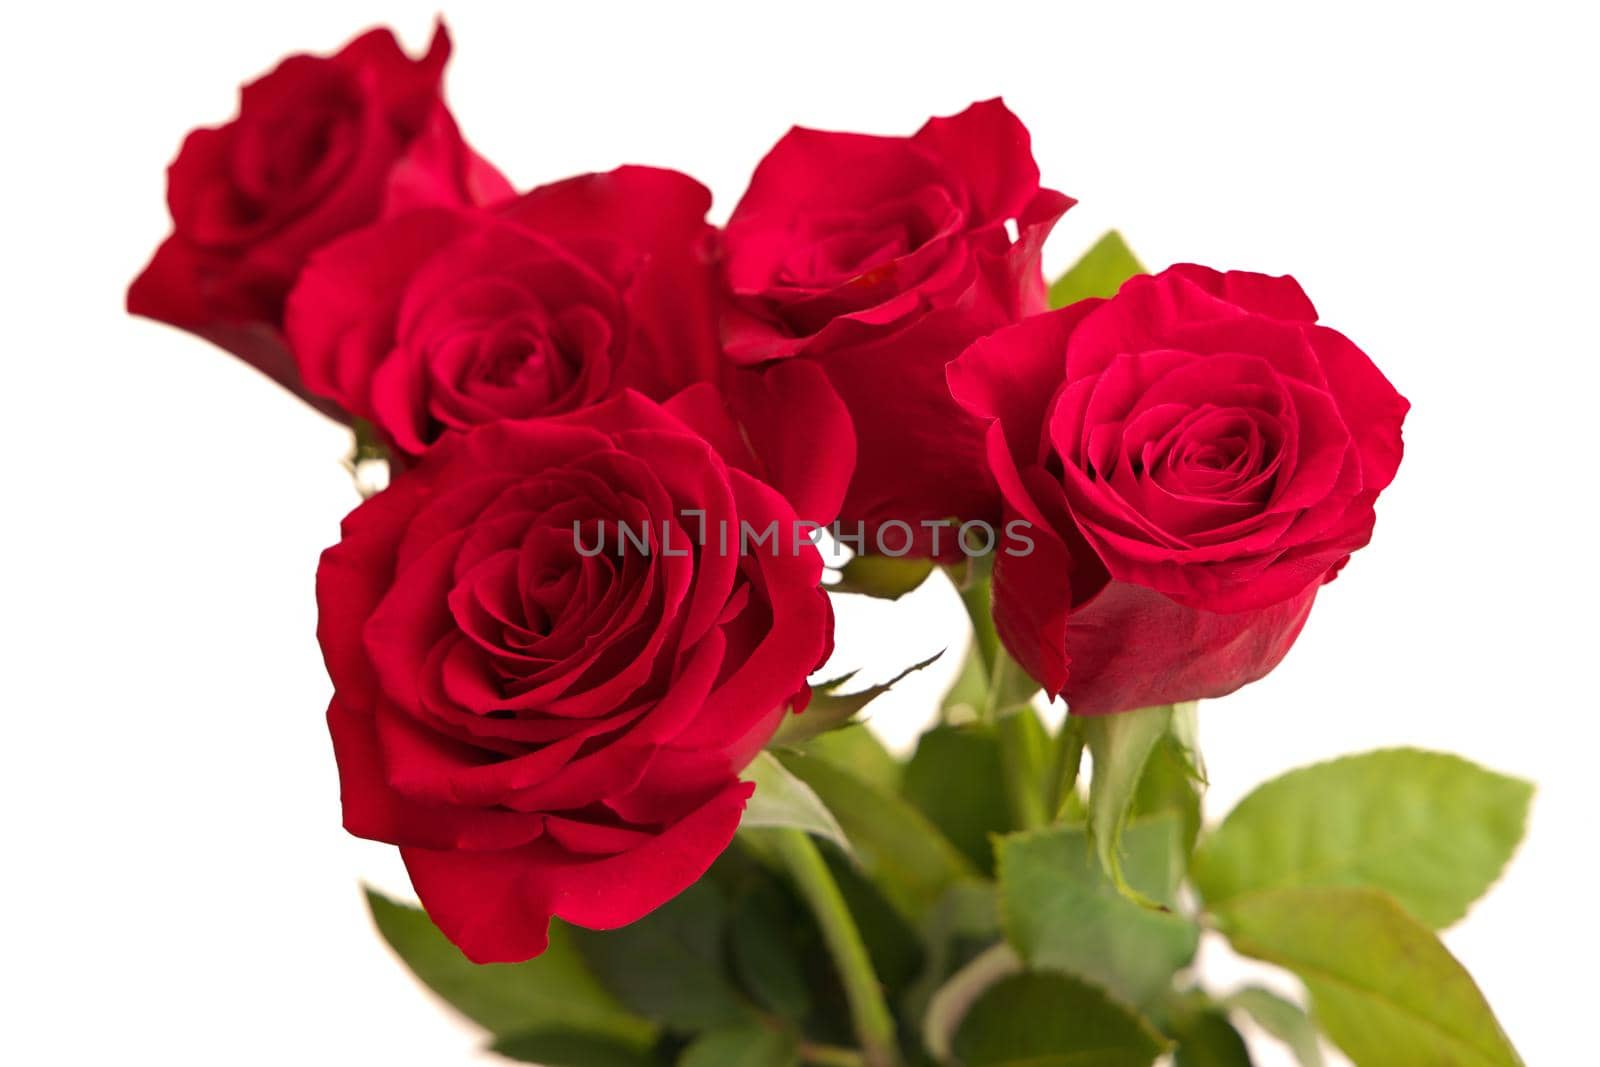 Bouquet of Red Roses in a Vase Isolated on a White Background. High quality studio photo